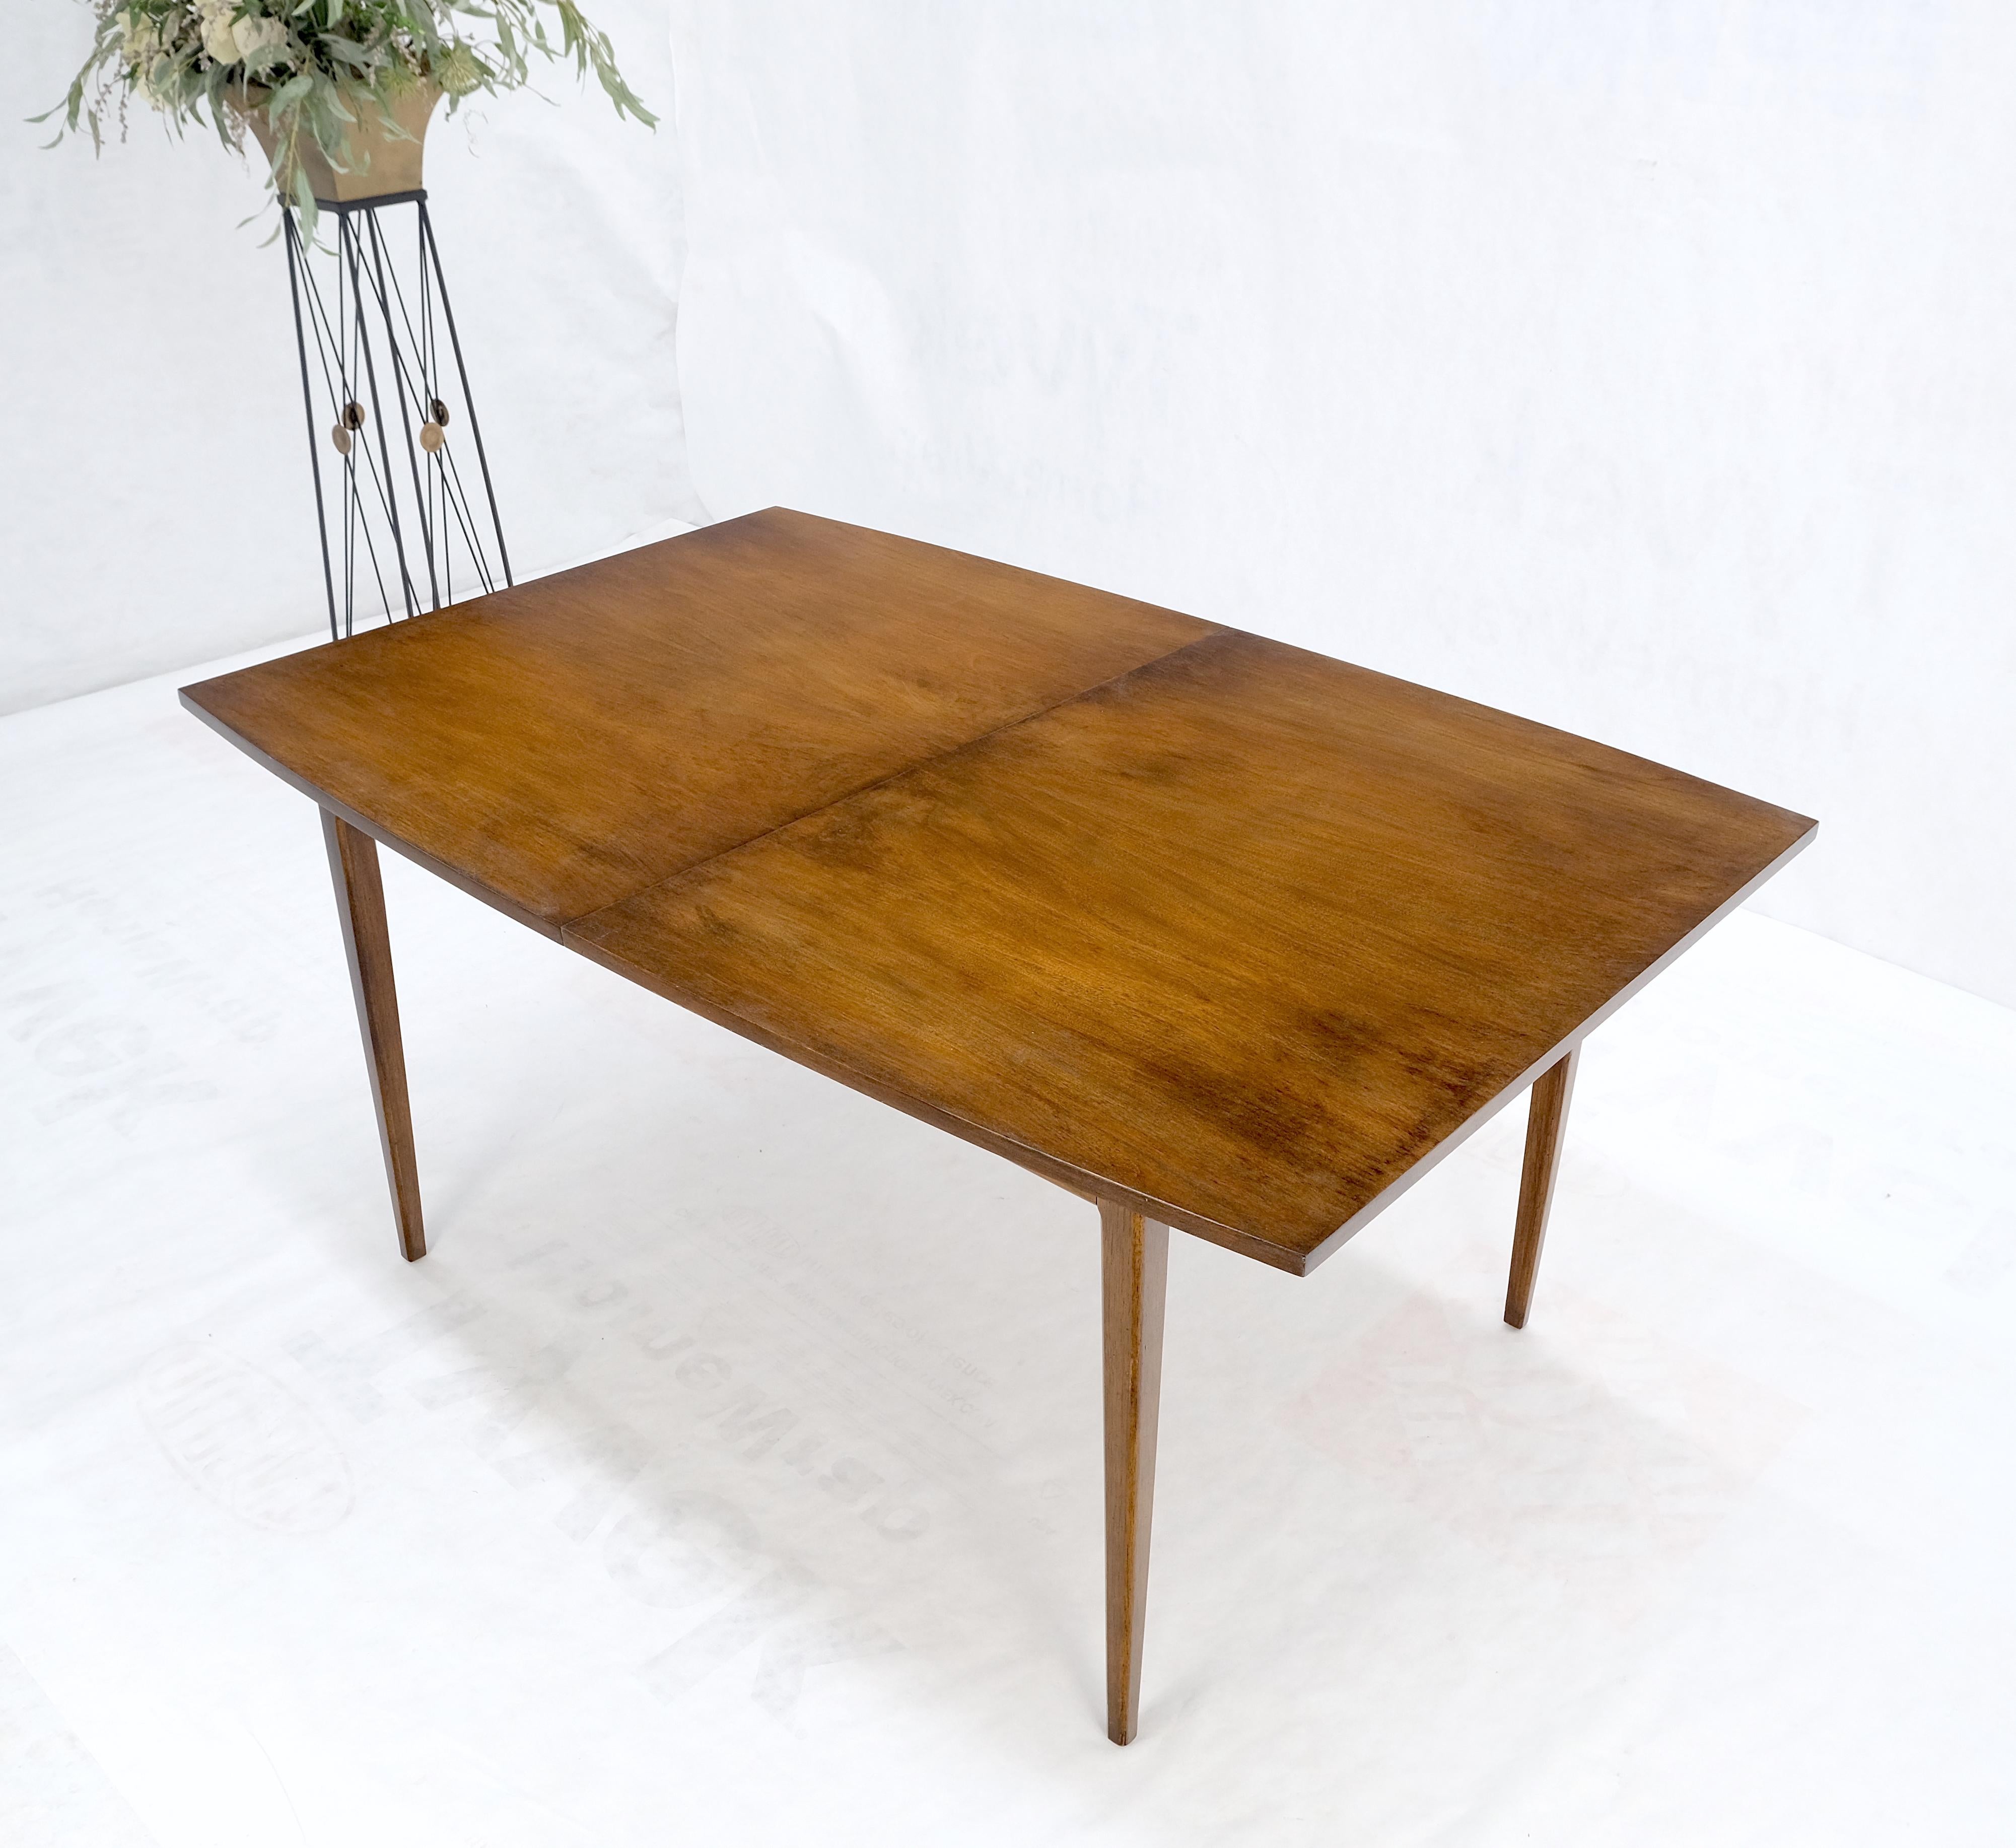 20th Century American Walnut Danish Mid Century Modern Style Dining Table 2 Extension Boards  For Sale